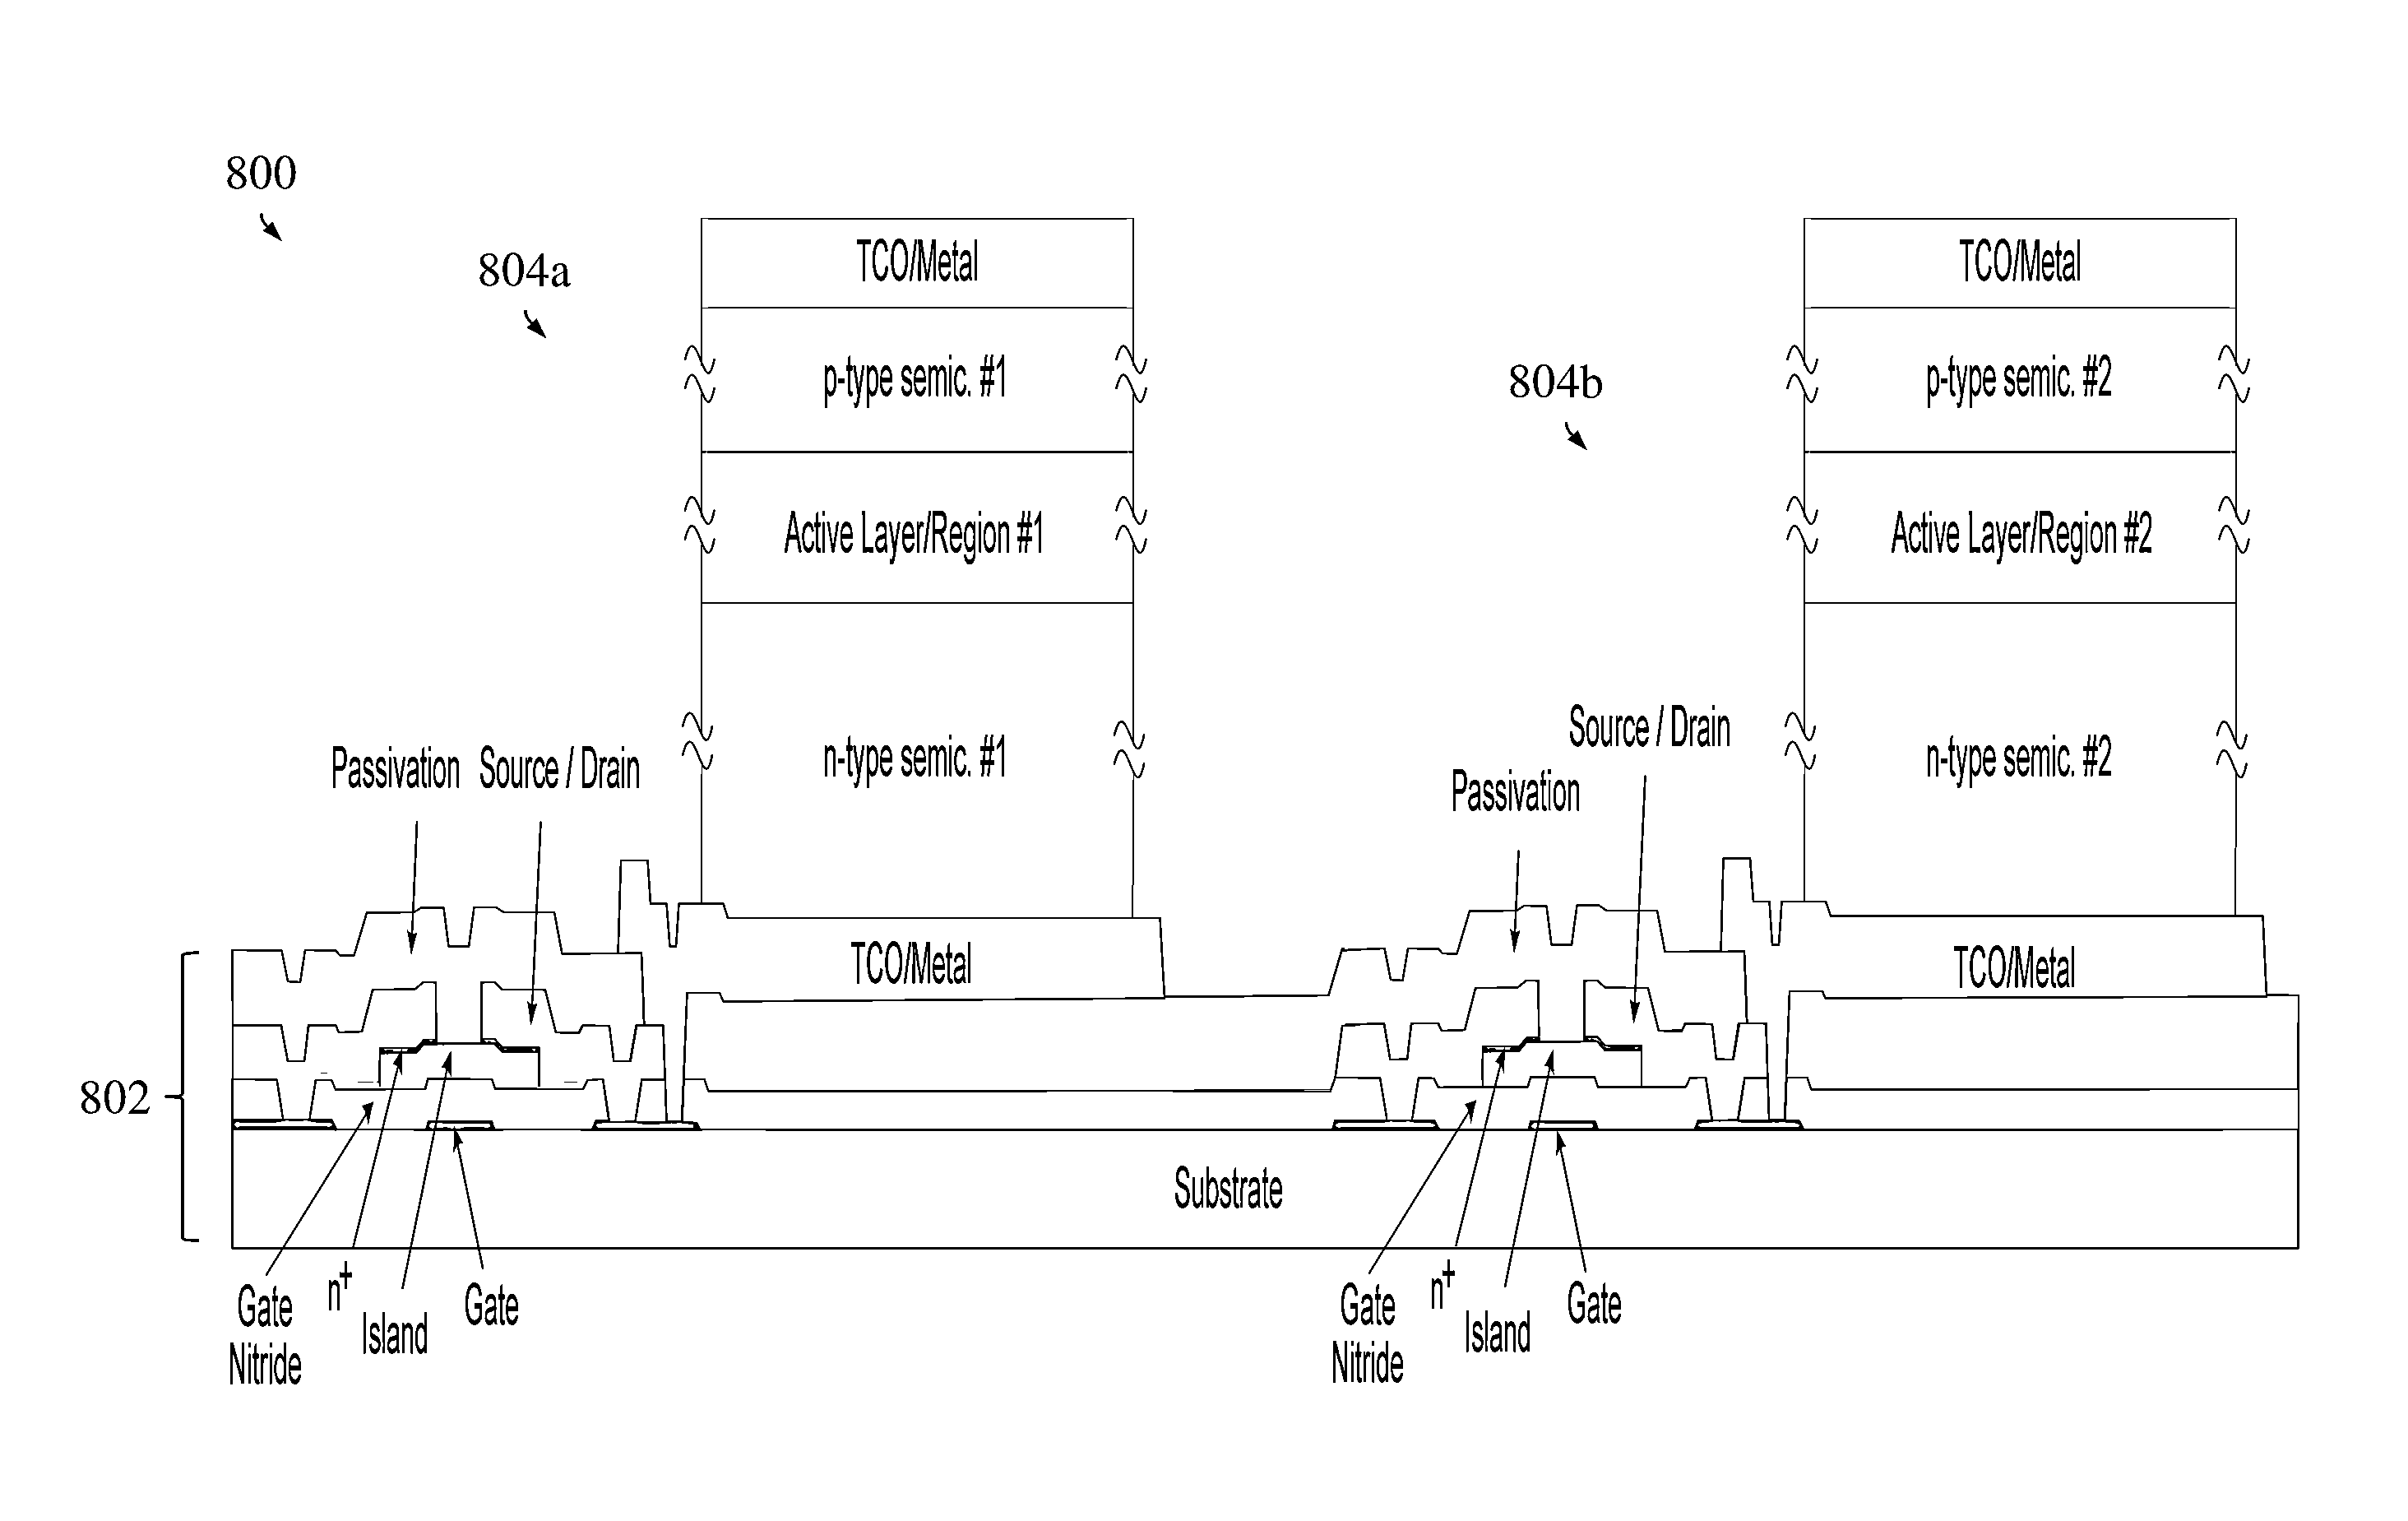 Integrating active matrix inorganic light emitting diodes for display devices